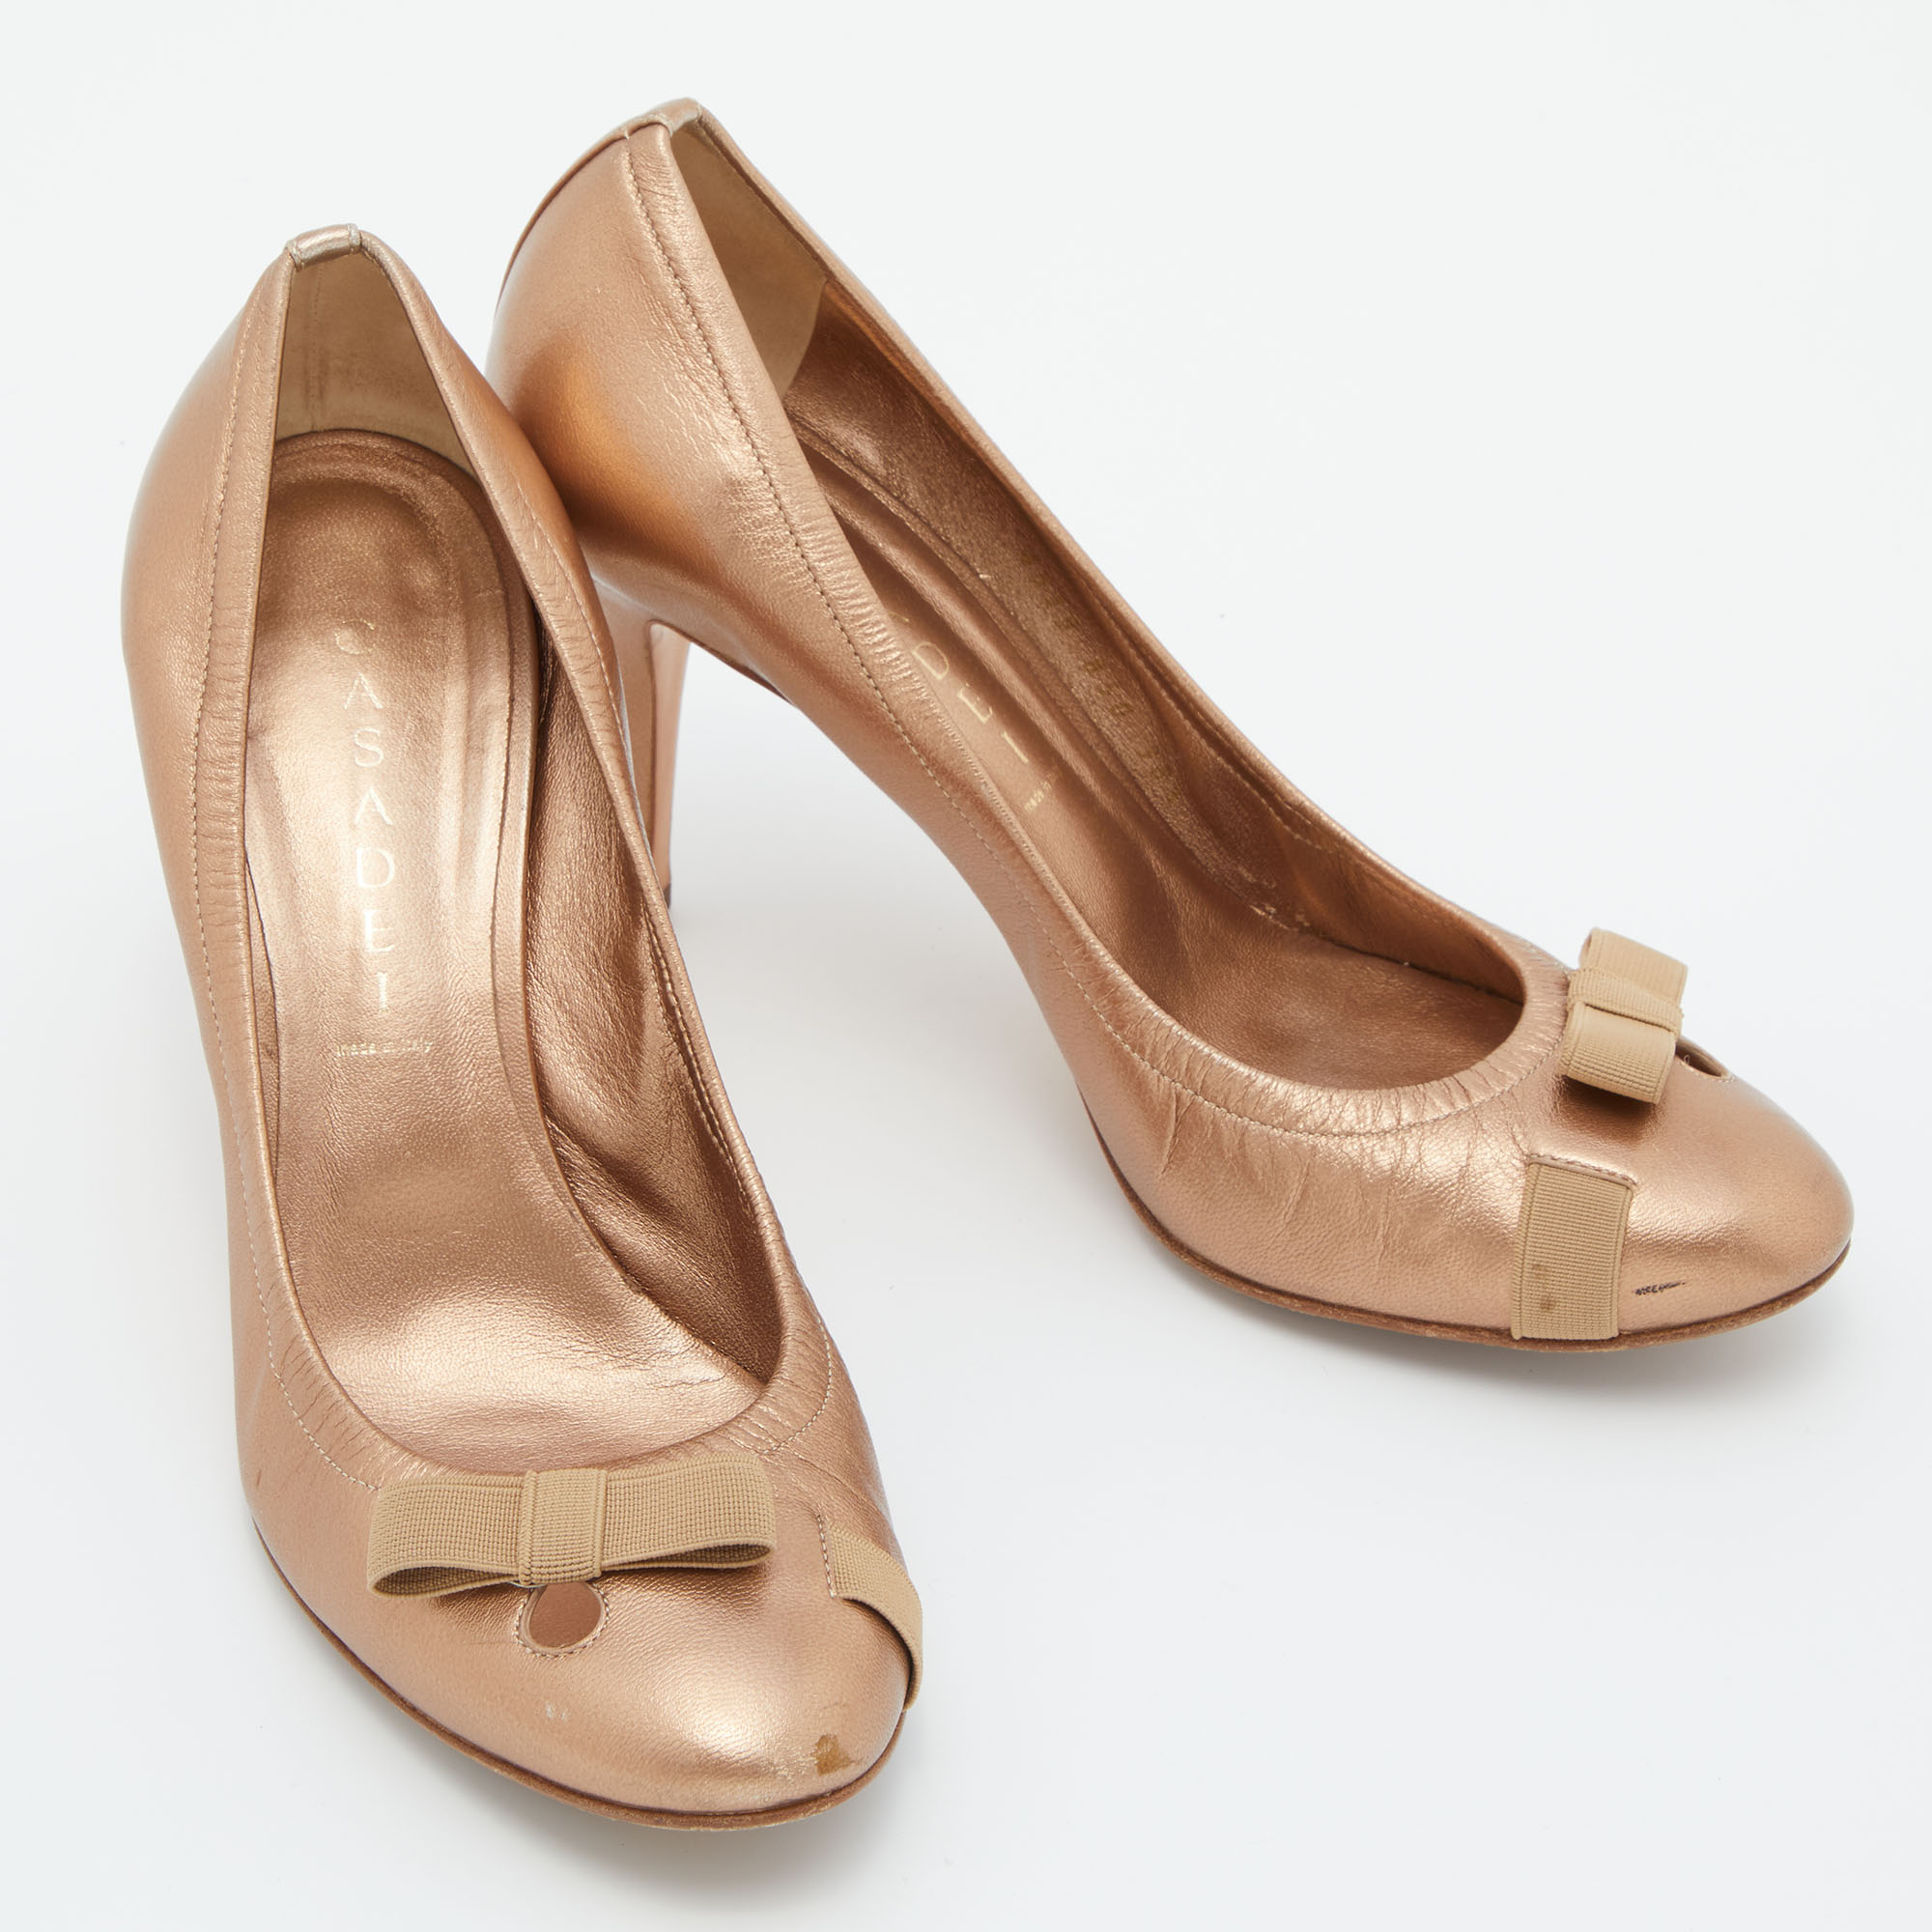 Casadei Metallic Leather Bow Pumps Size 38.5